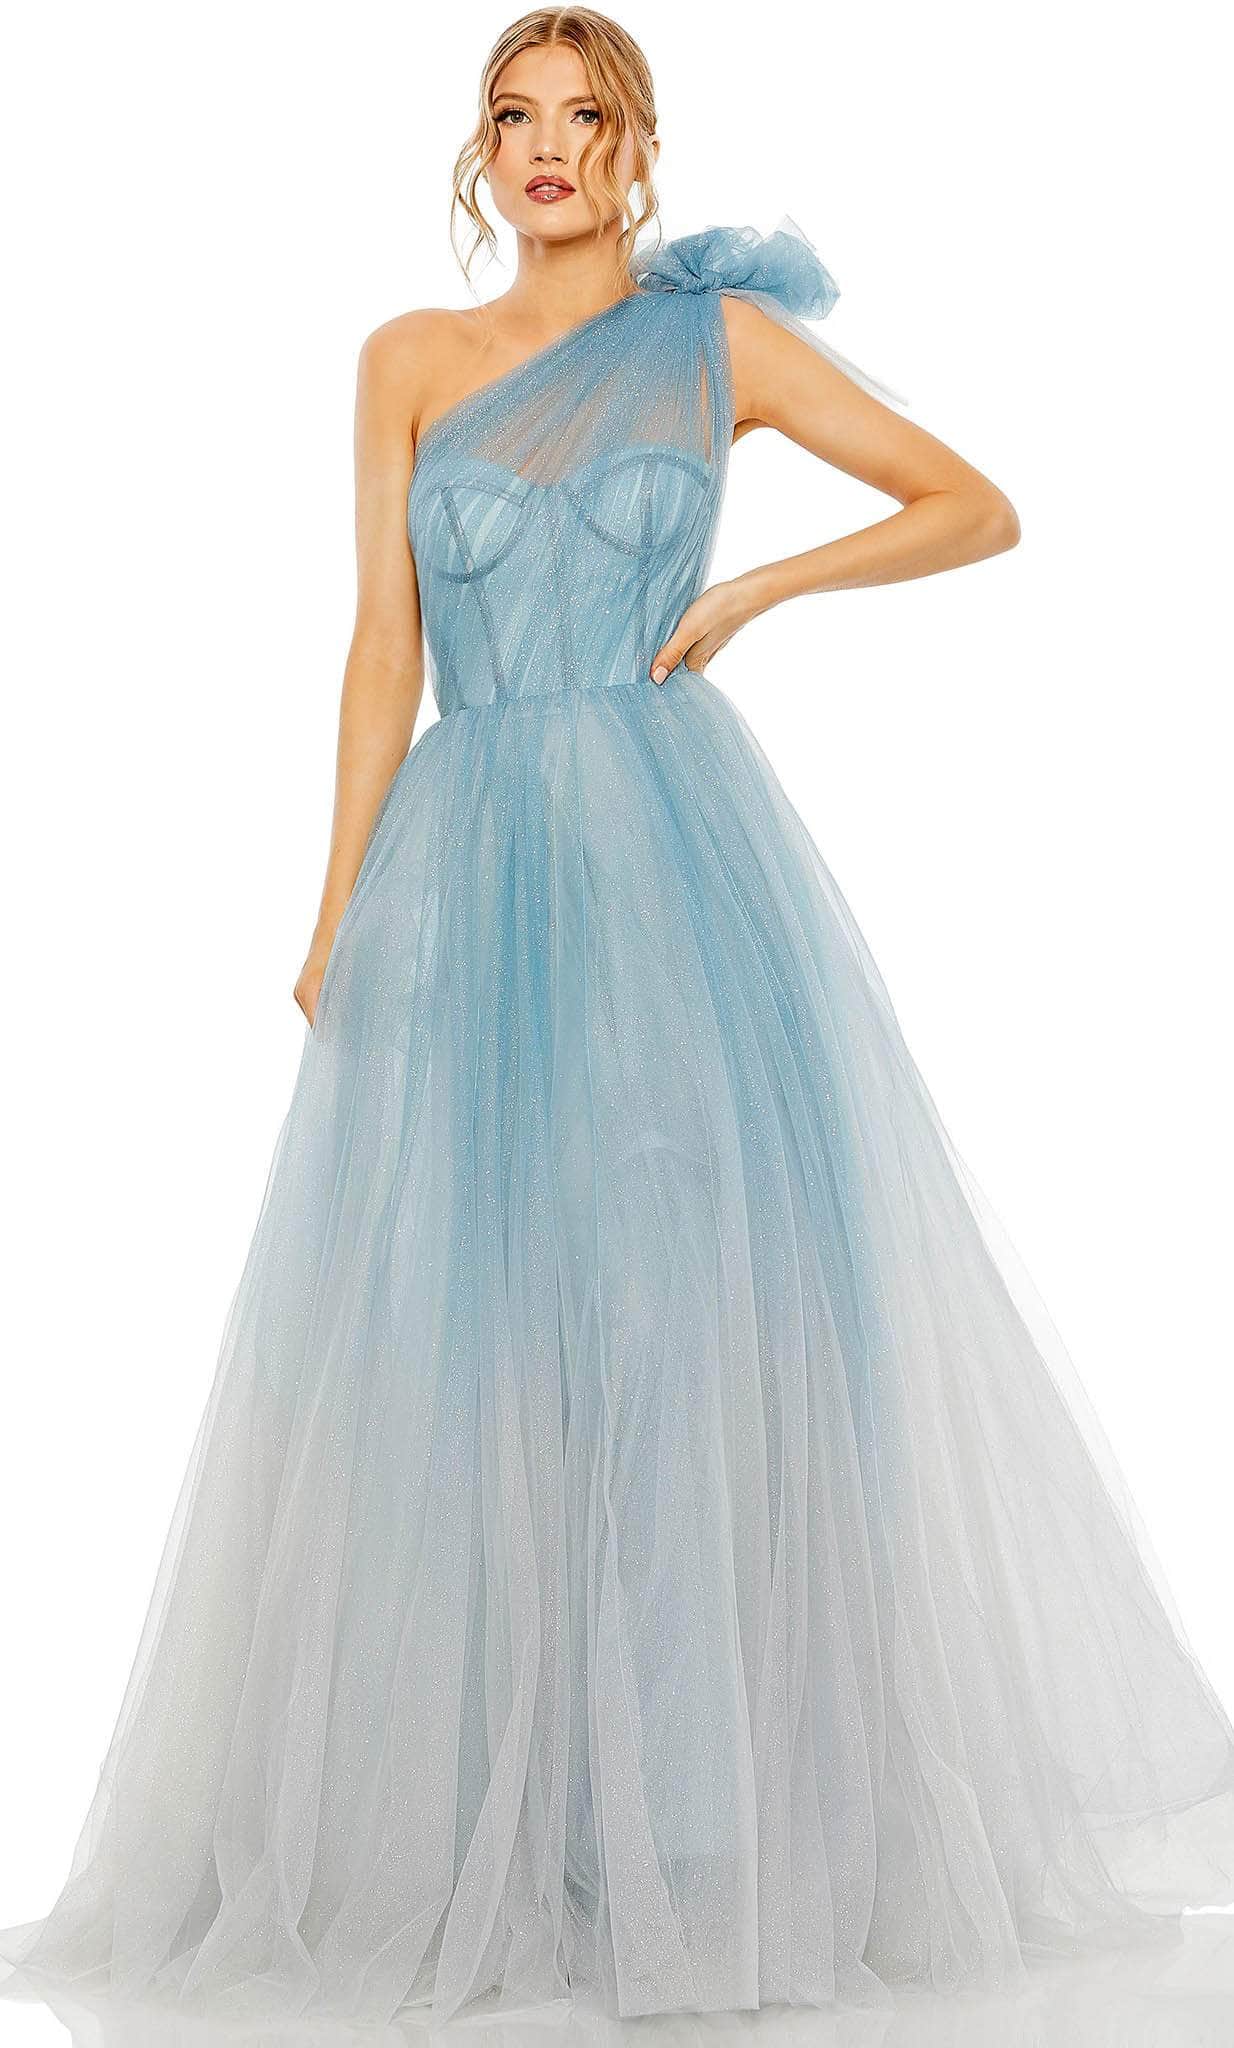 Image of Mac Duggal 20552 - Asymmetrical Tulle Prom Dress